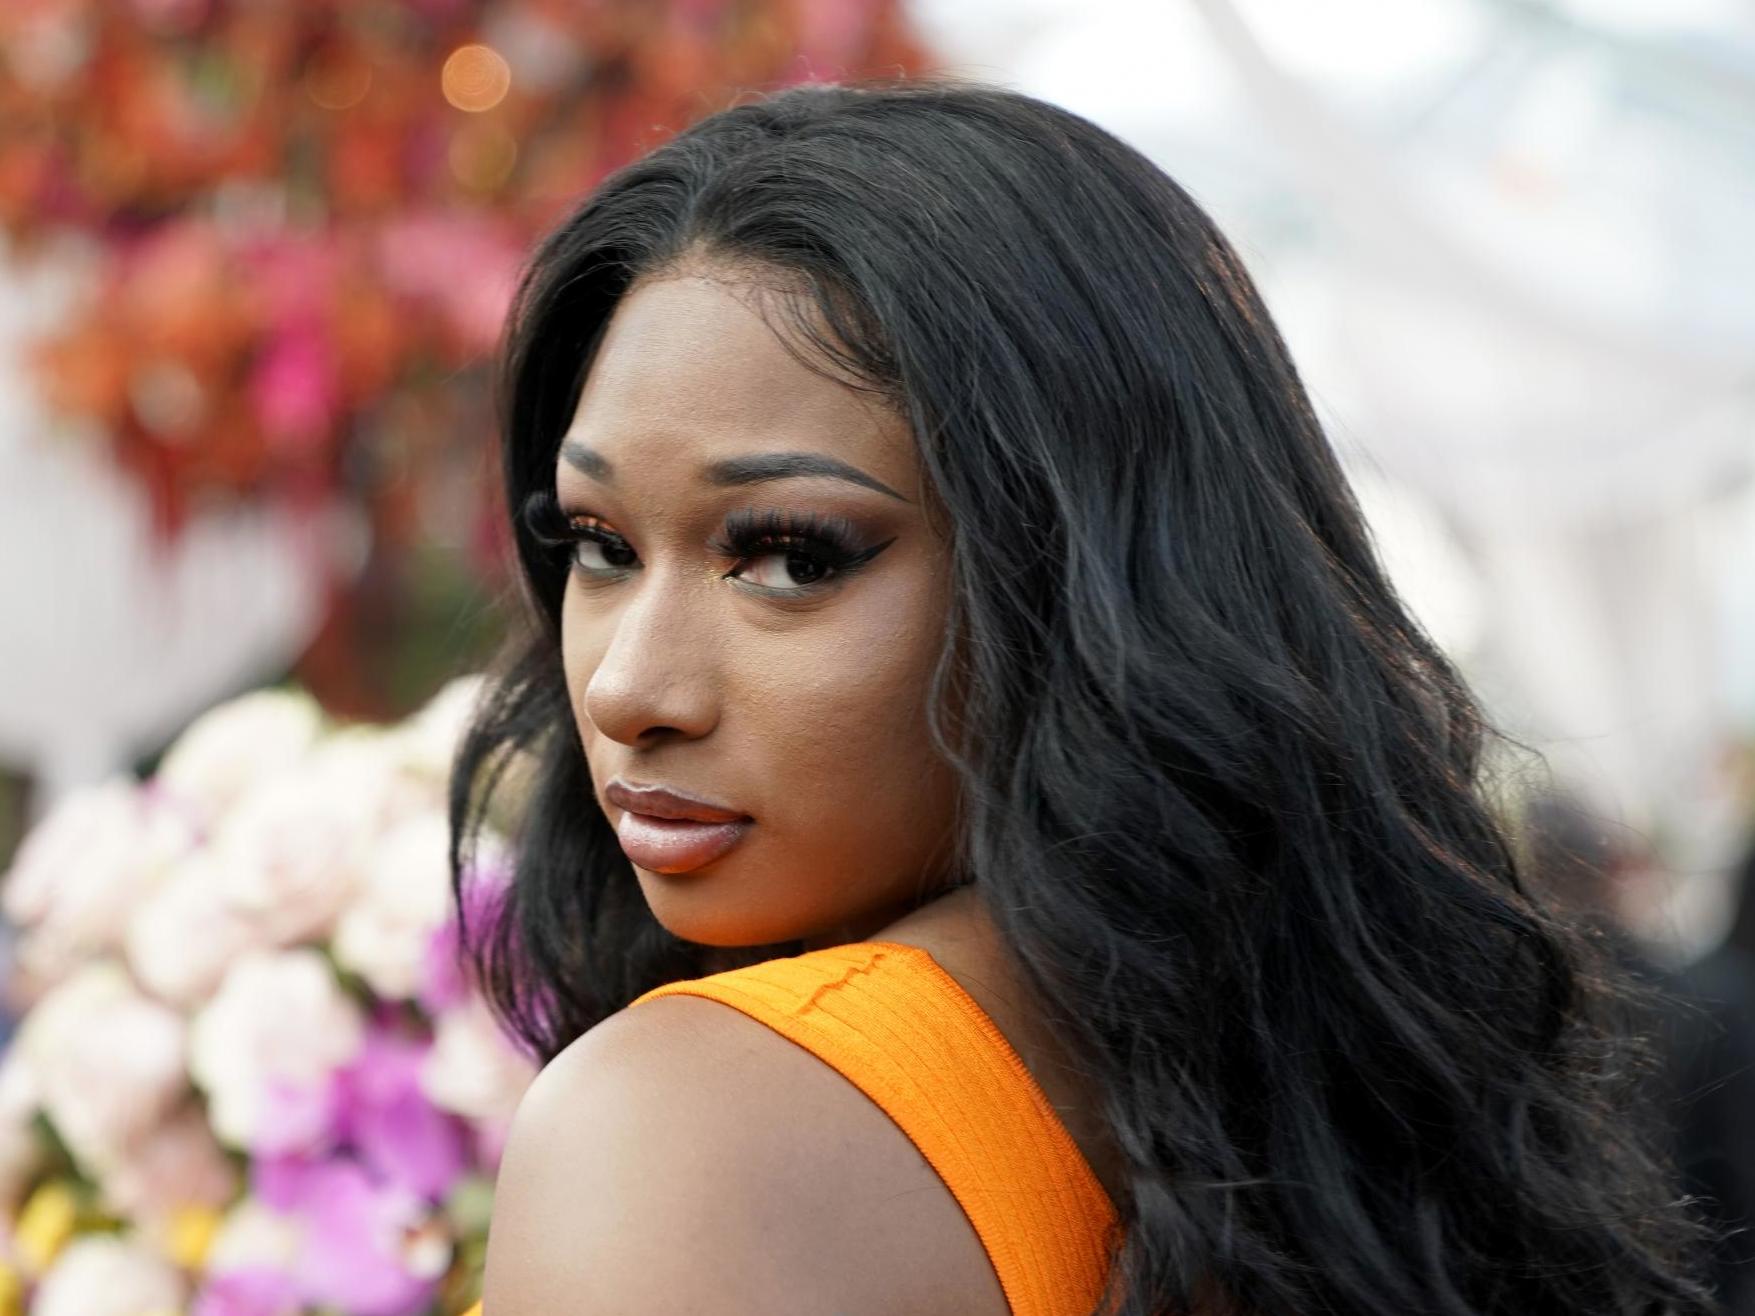 Megan Thee Stallion ‘traumatised’ after being shot ‘Black women are so